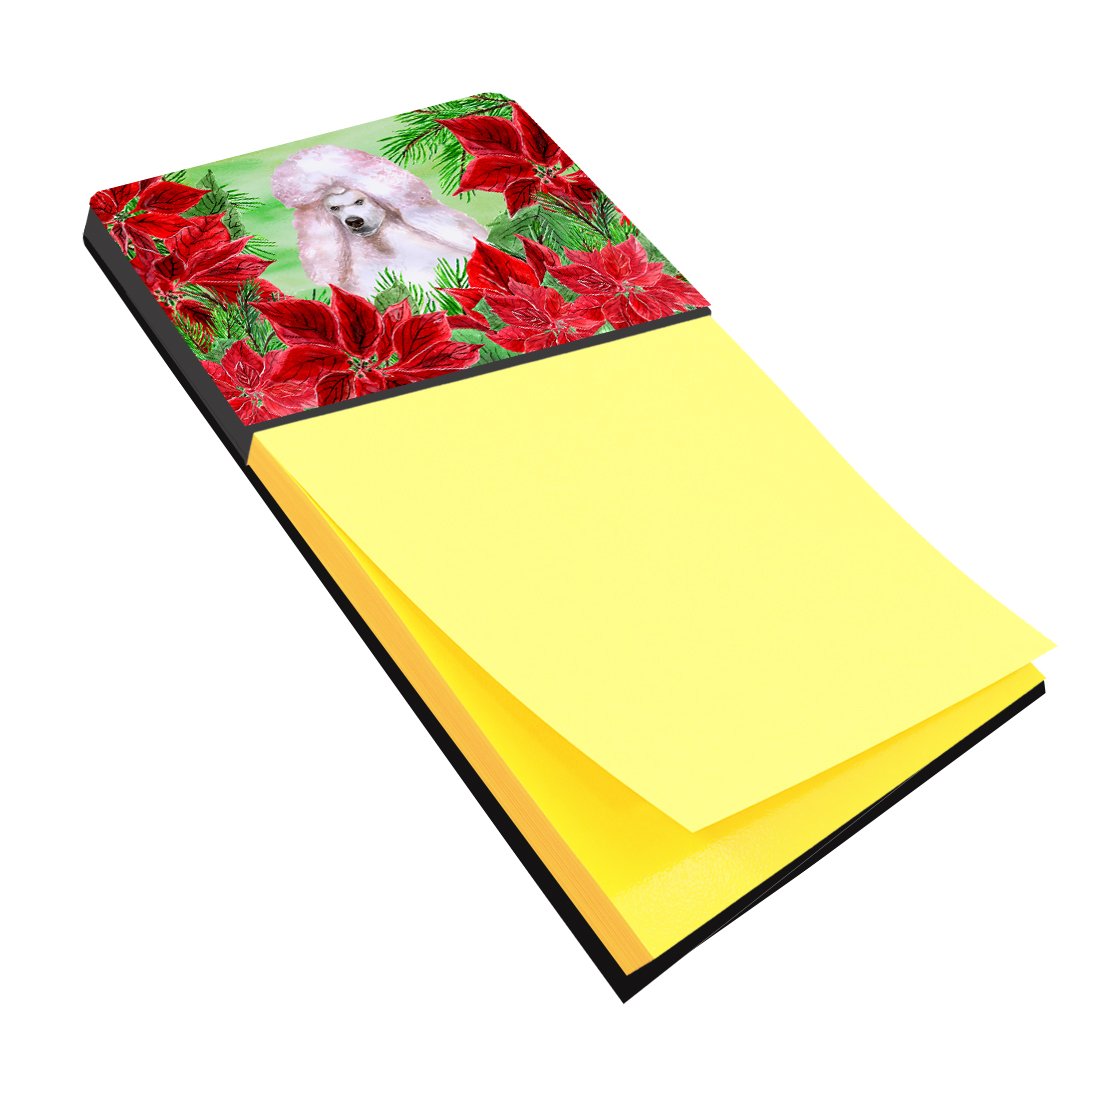 White Standard Poodle Poinsettas Sticky Note Holder CK1364SN by Caroline's Treasures